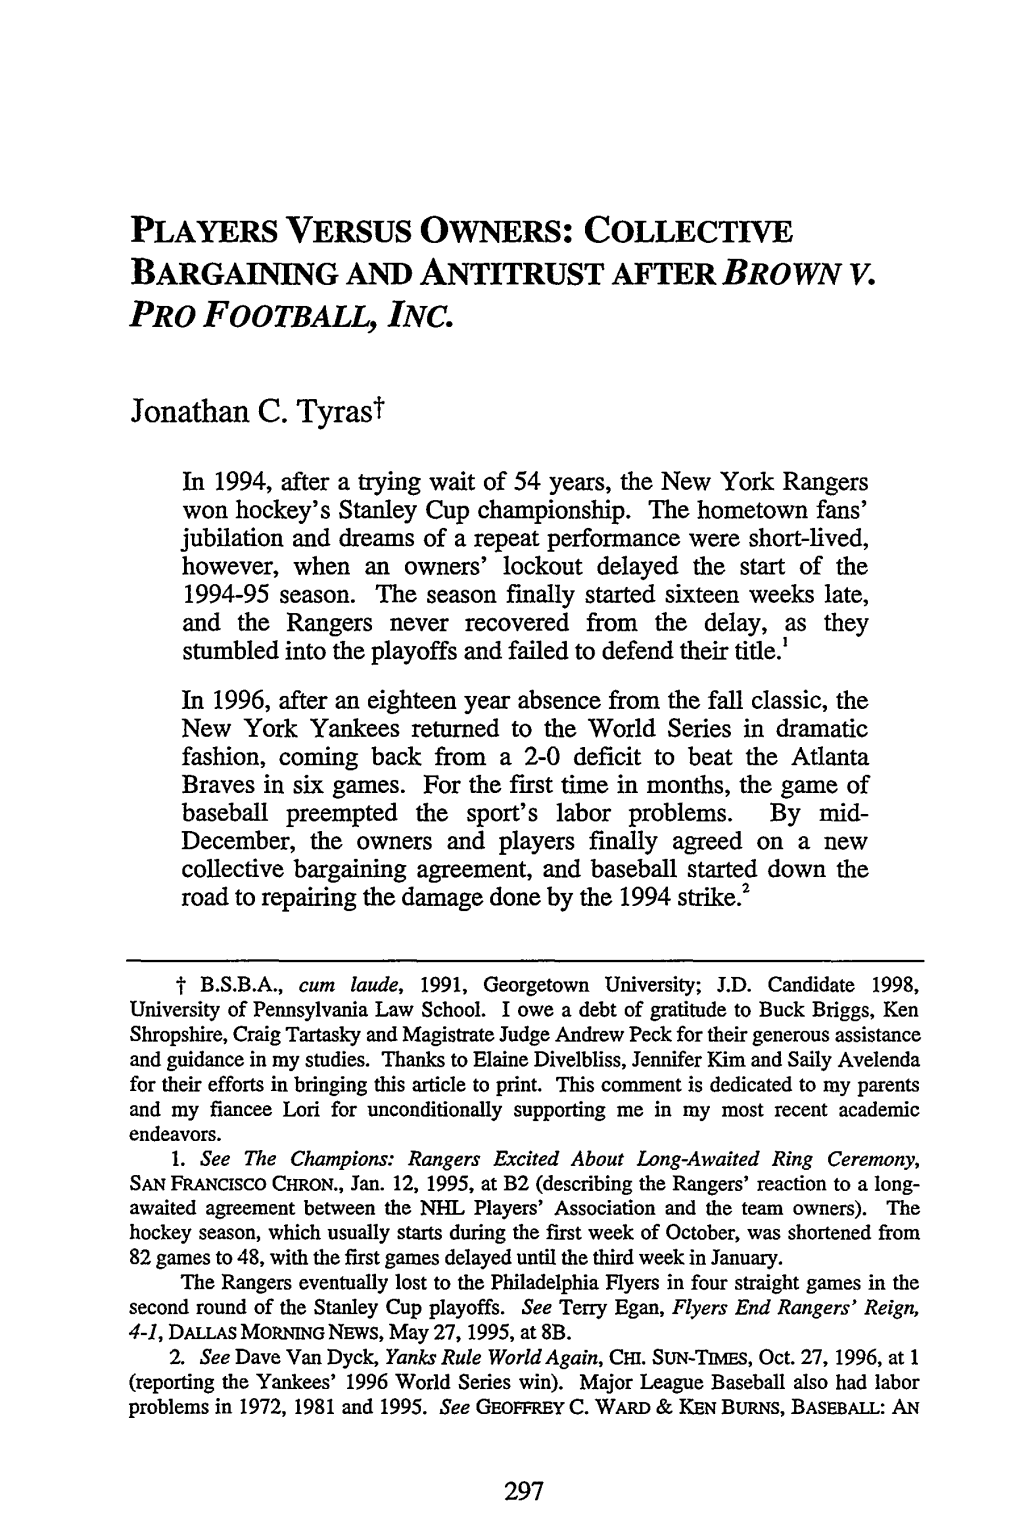 Collective Bargaining and Antitrust After Brown V. Pro Football, Inc